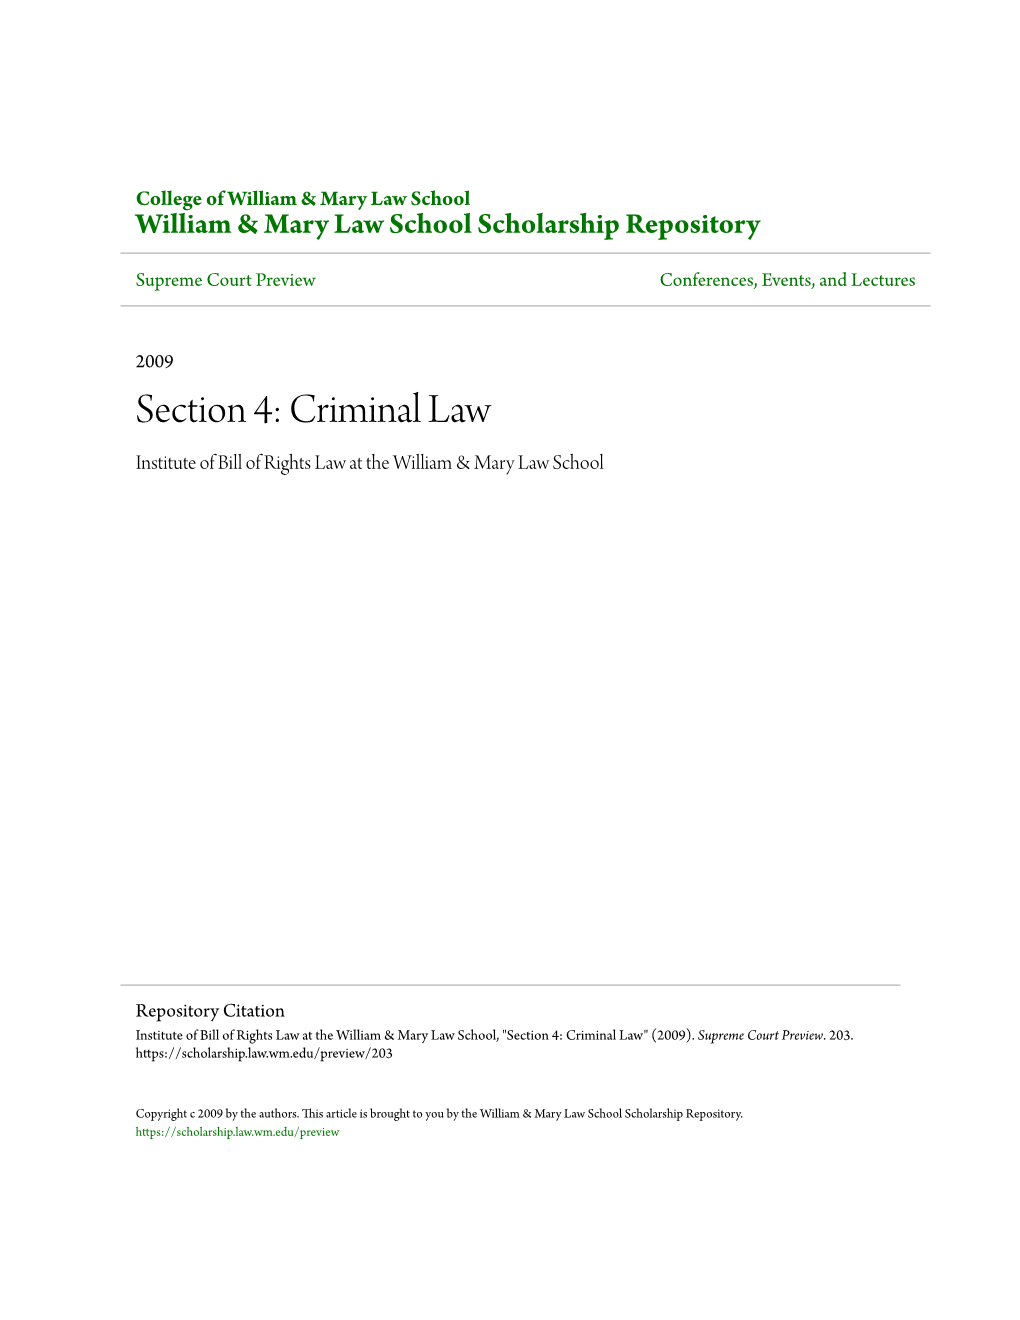 Section 4: Criminal Law Institute of Bill of Rights Law at the William & Mary Law School